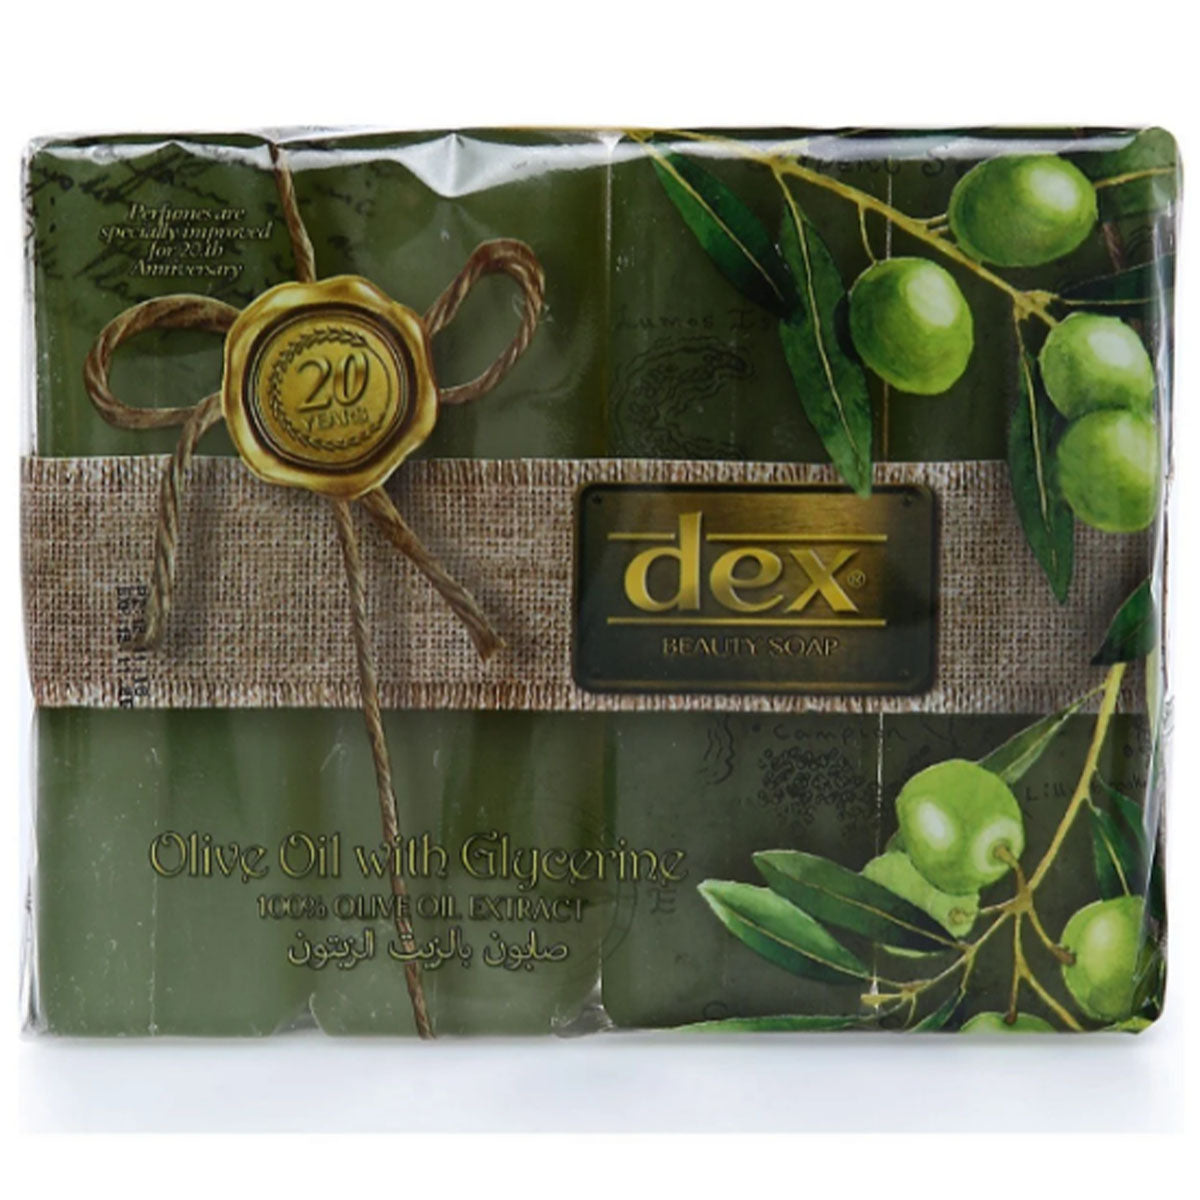 Dex - Olive Oil Bath Soap with Glycerin - 150g - Continental Food Store